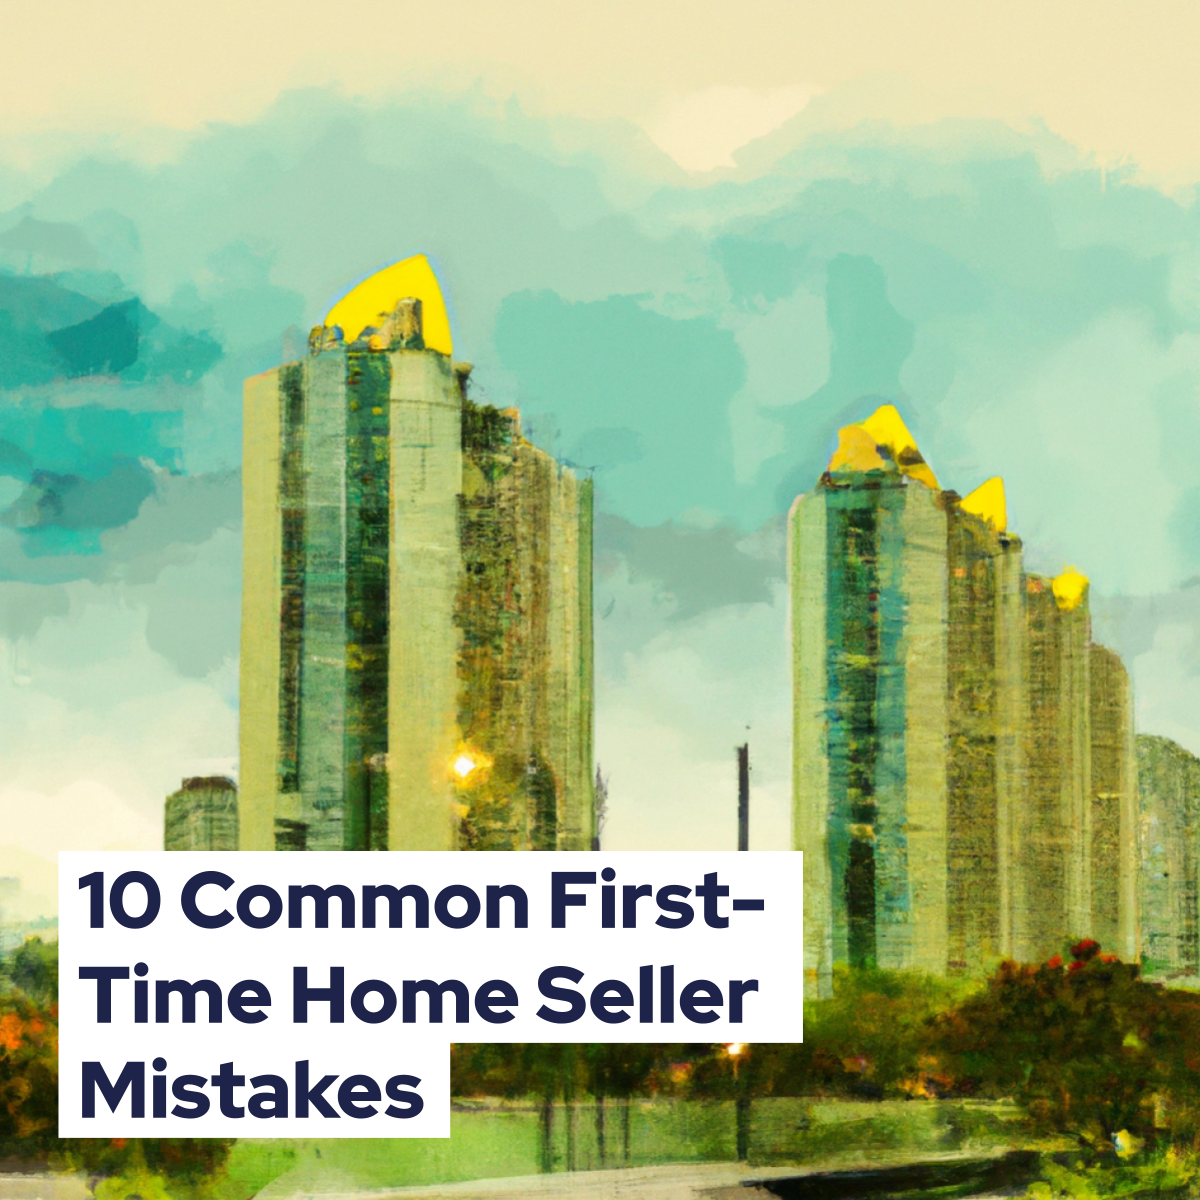 10 common first time home seller mistakes (eng)